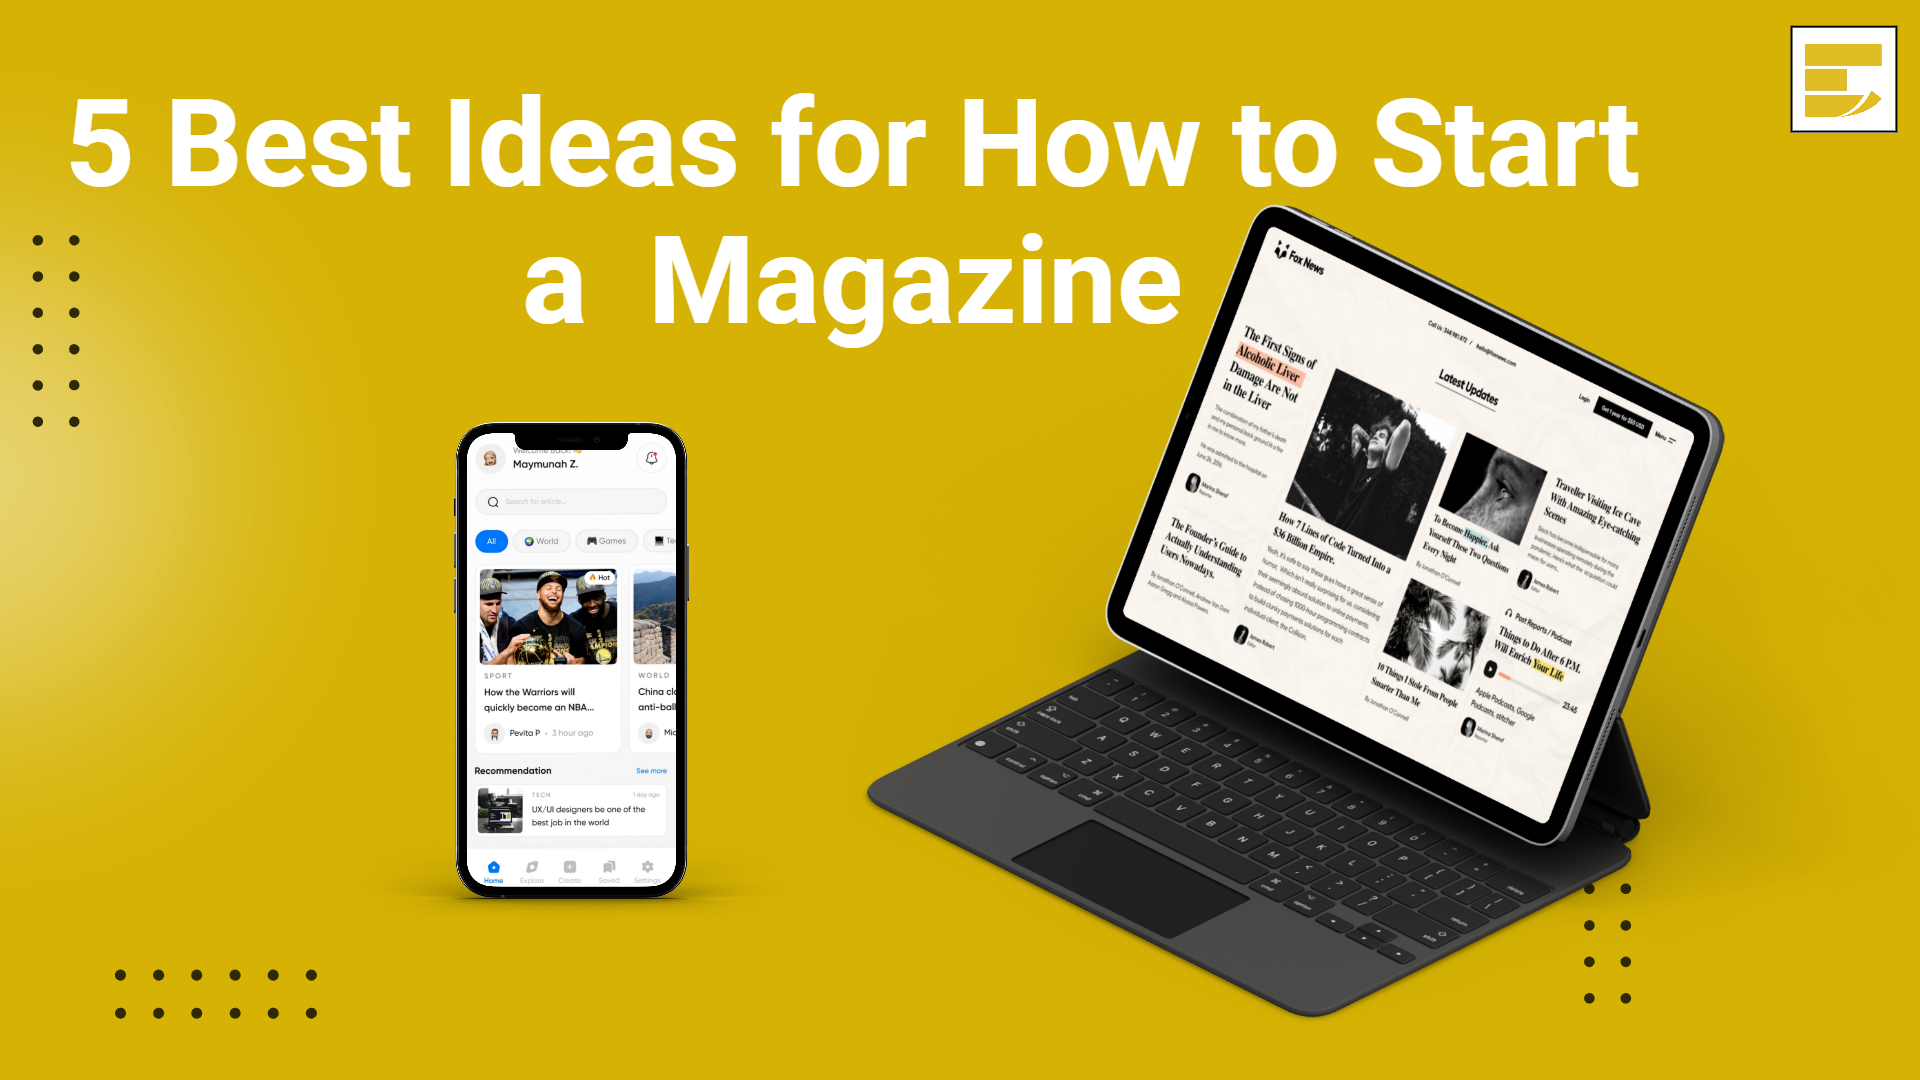 The 5 Best Ideas for How to Start a Magazine in 2022